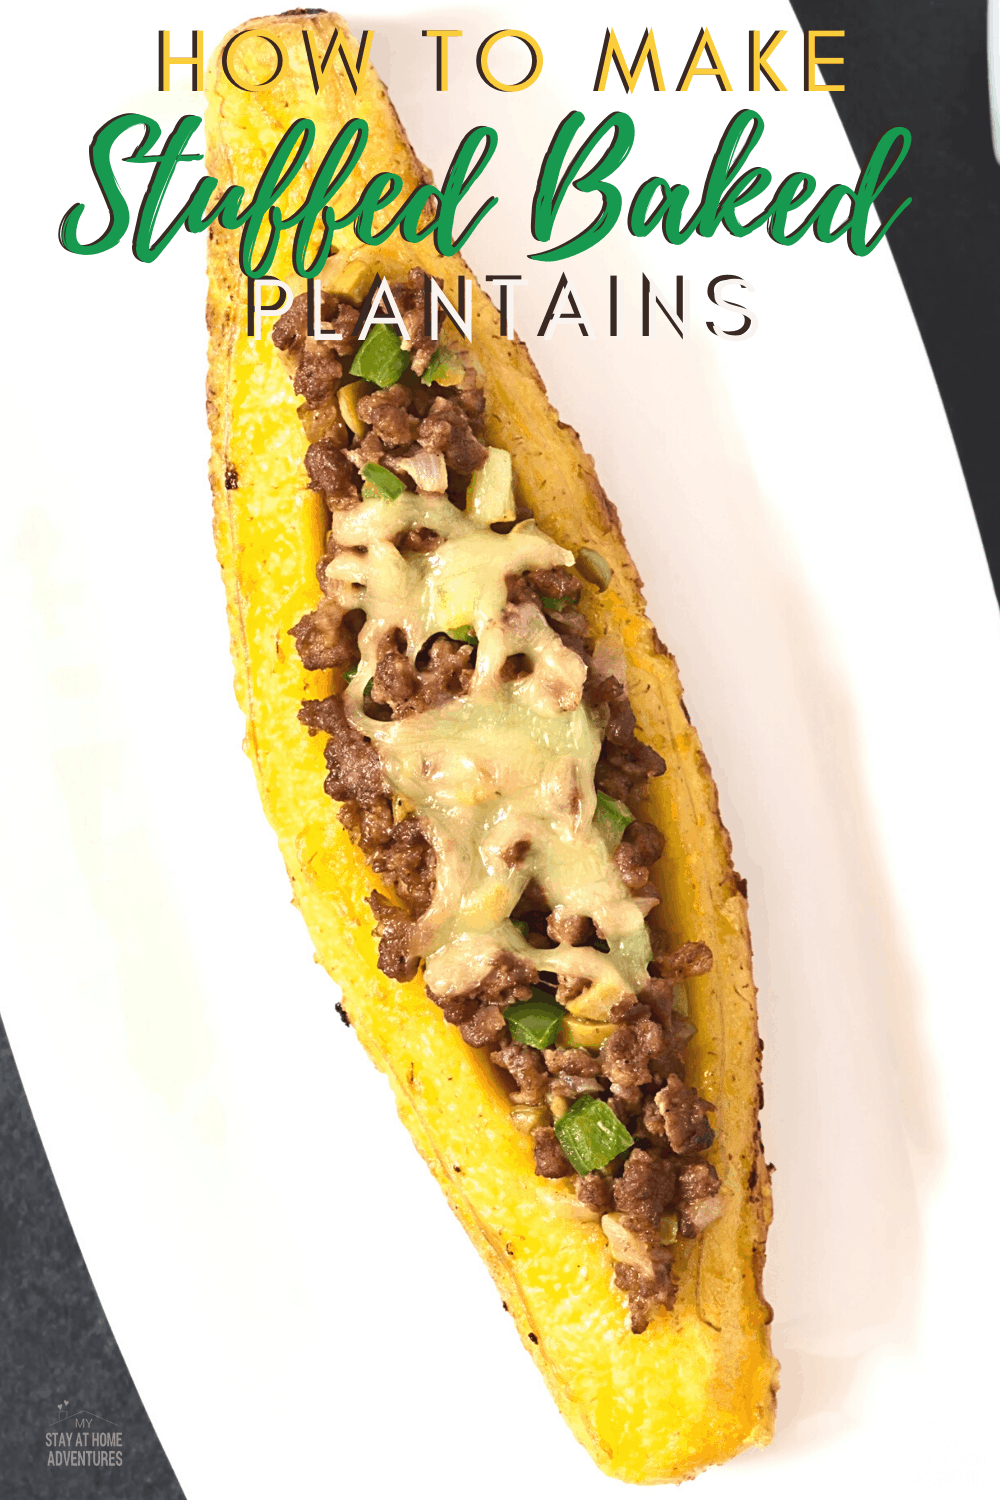 Learn how to make this Puerto Rican stuffed baked plantains or Canoas De Plátanos Maduros that your family is going to love. #plantain #puertoricanfood #stuffplatanos via @mystayathome